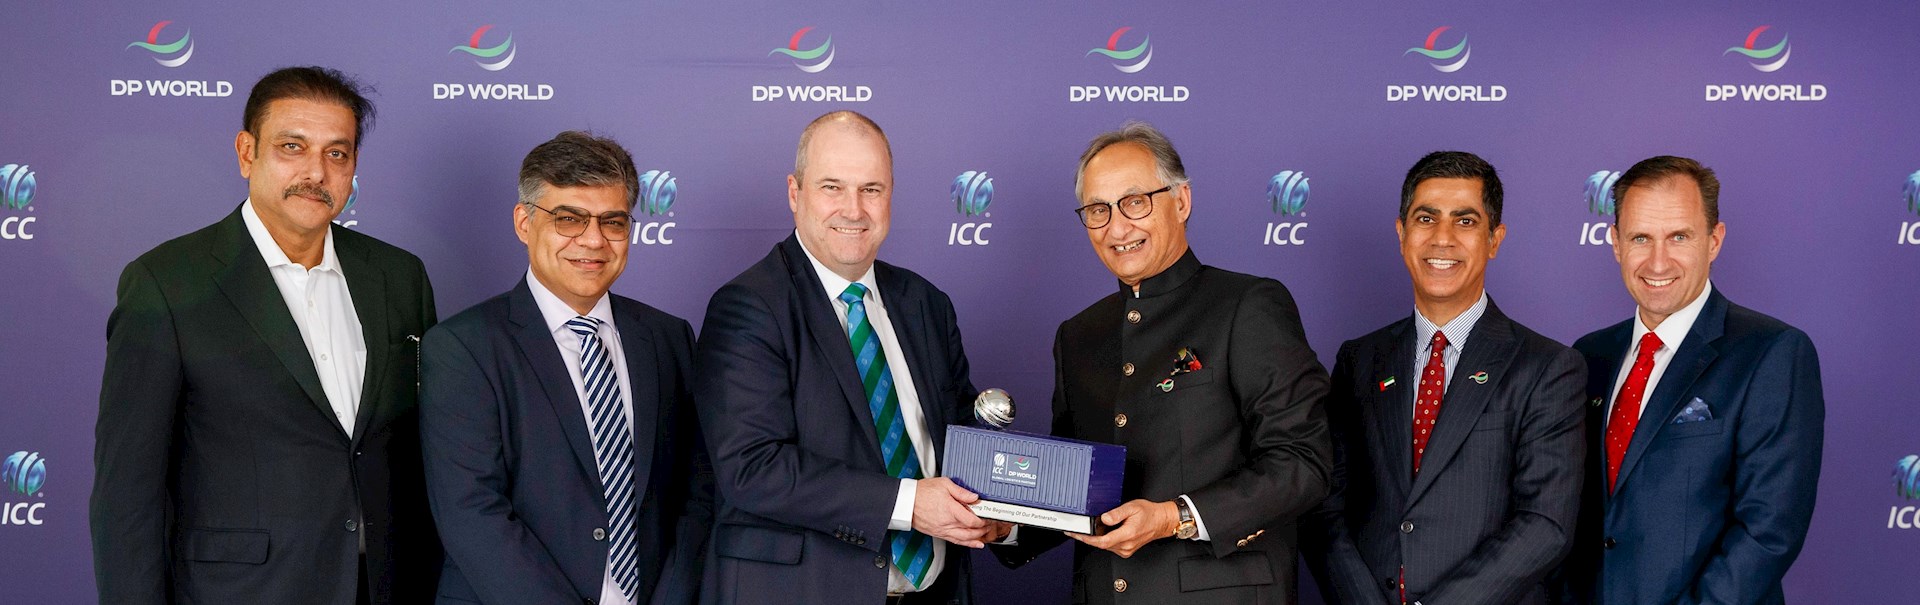 DP World and the ICC